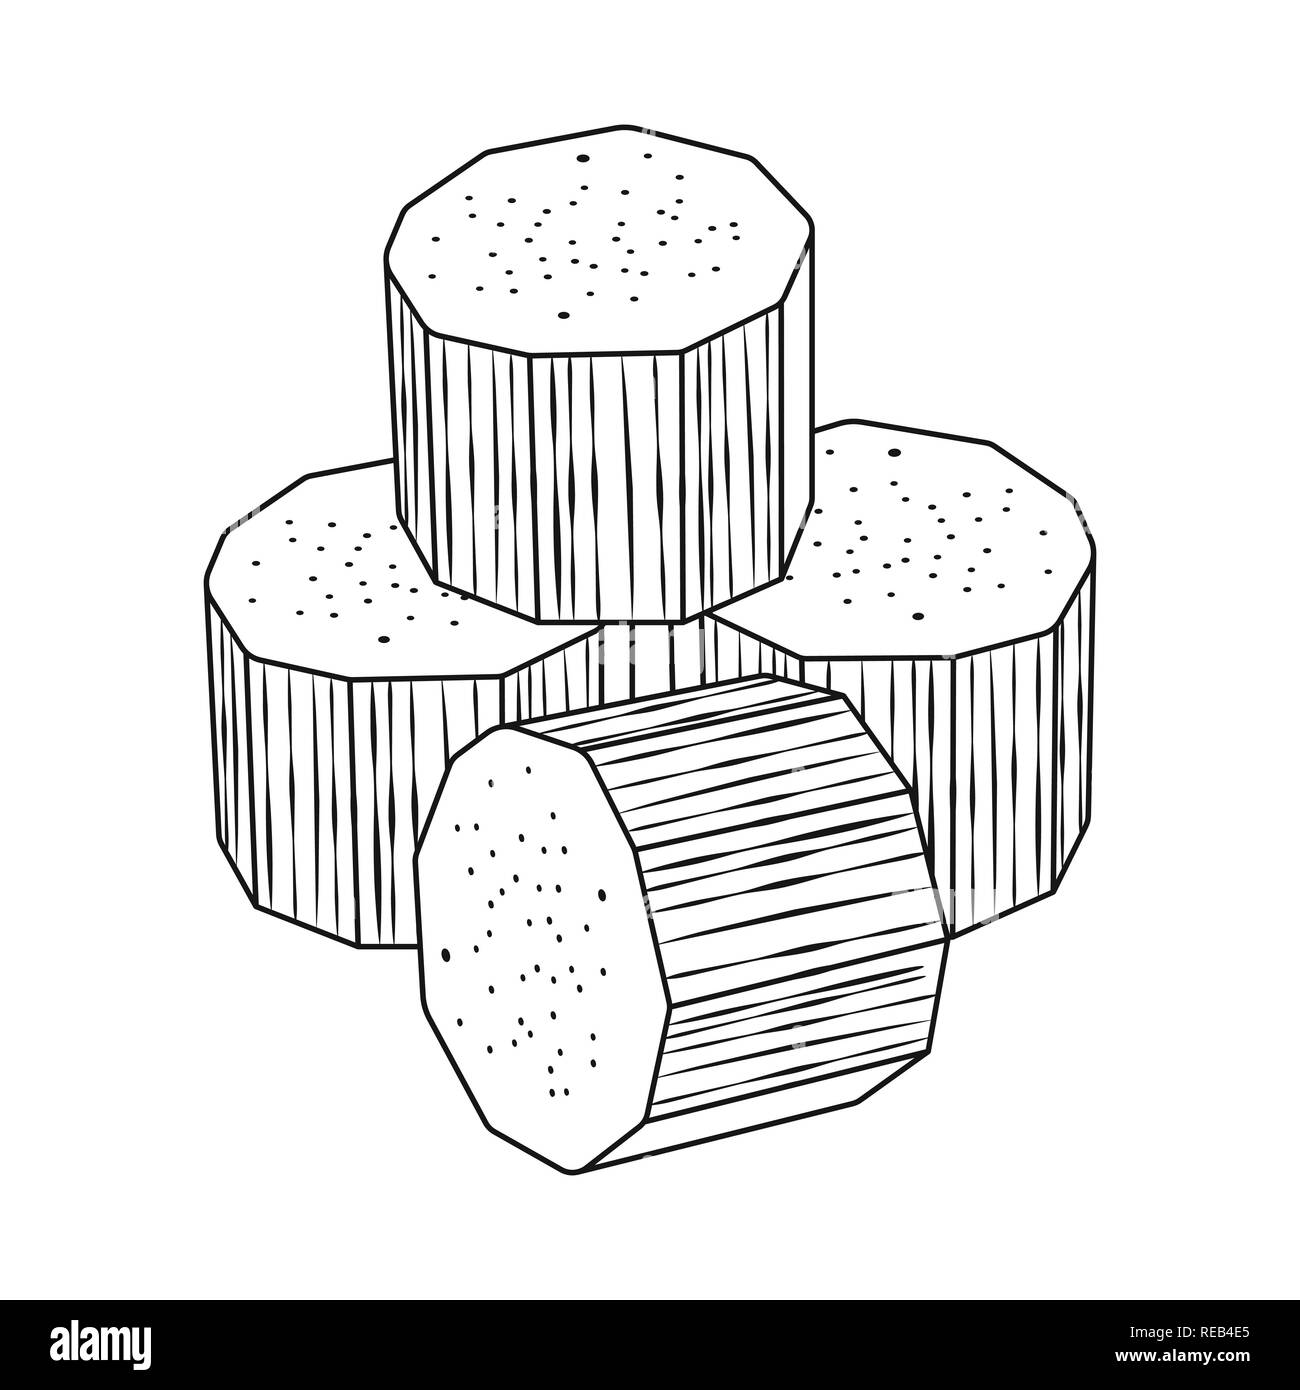 piece,cube,brown,jaggery,block,organic,india,africa,carbohydrate,solid,sugarcane,cane,sugar,field,plant,plantation,farm,agriculture,sucrose,technology,set,vector,icon,illustration,isolated,collection,design,element,graphic,sign,outline,line, Vector Vectors , Stock Vector